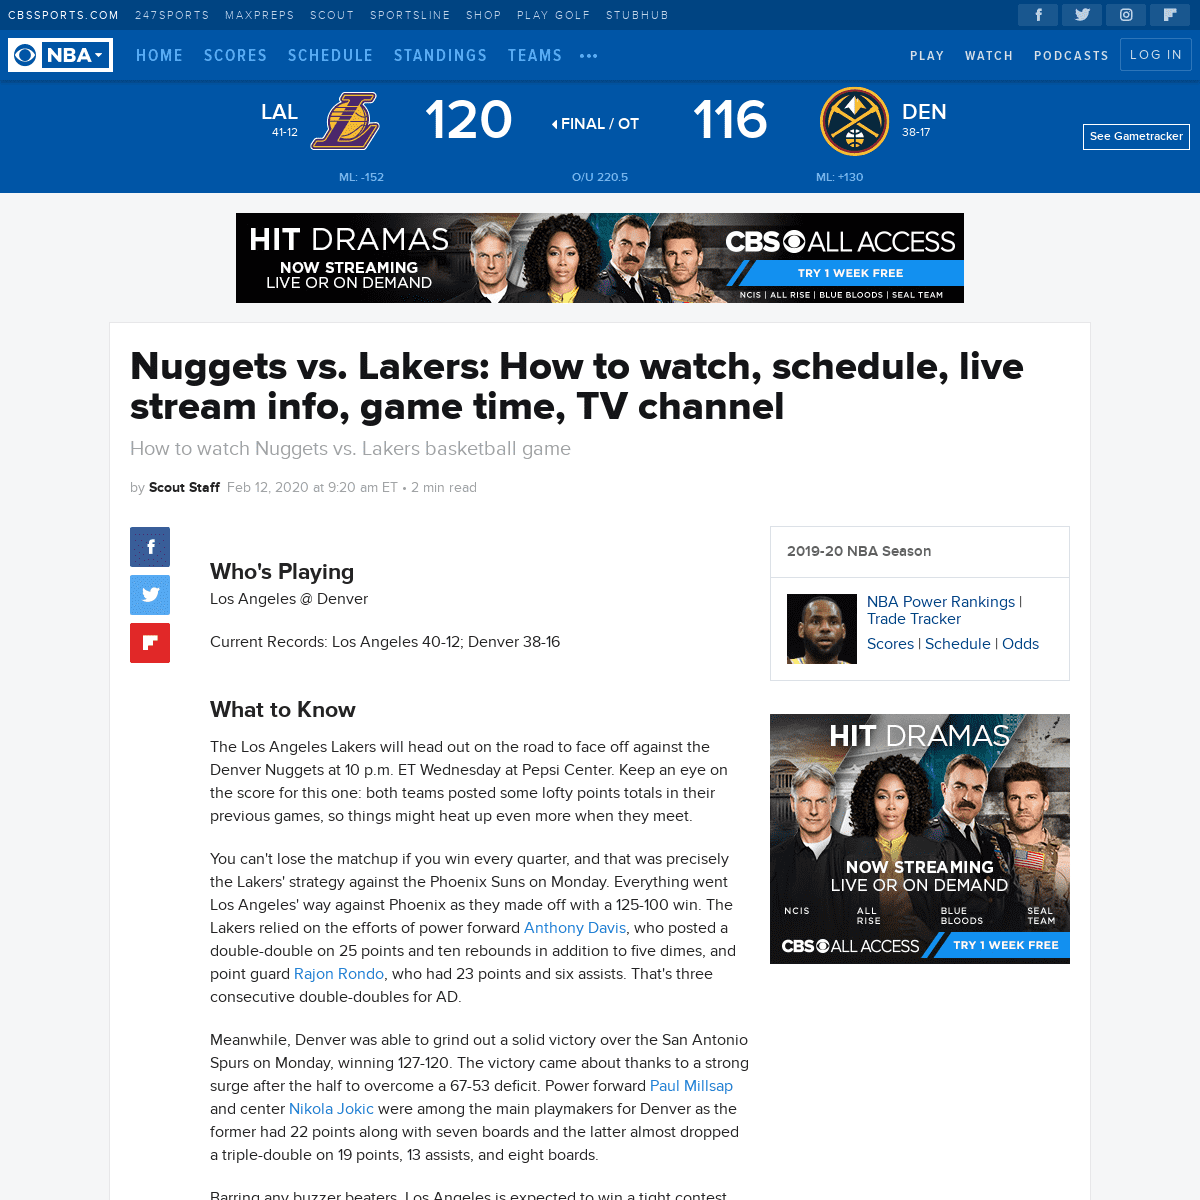 A complete backup of www.cbssports.com/nba/news/nuggets-vs-lakers-how-to-watch-schedule-live-stream-info-game-time-tv-channel/